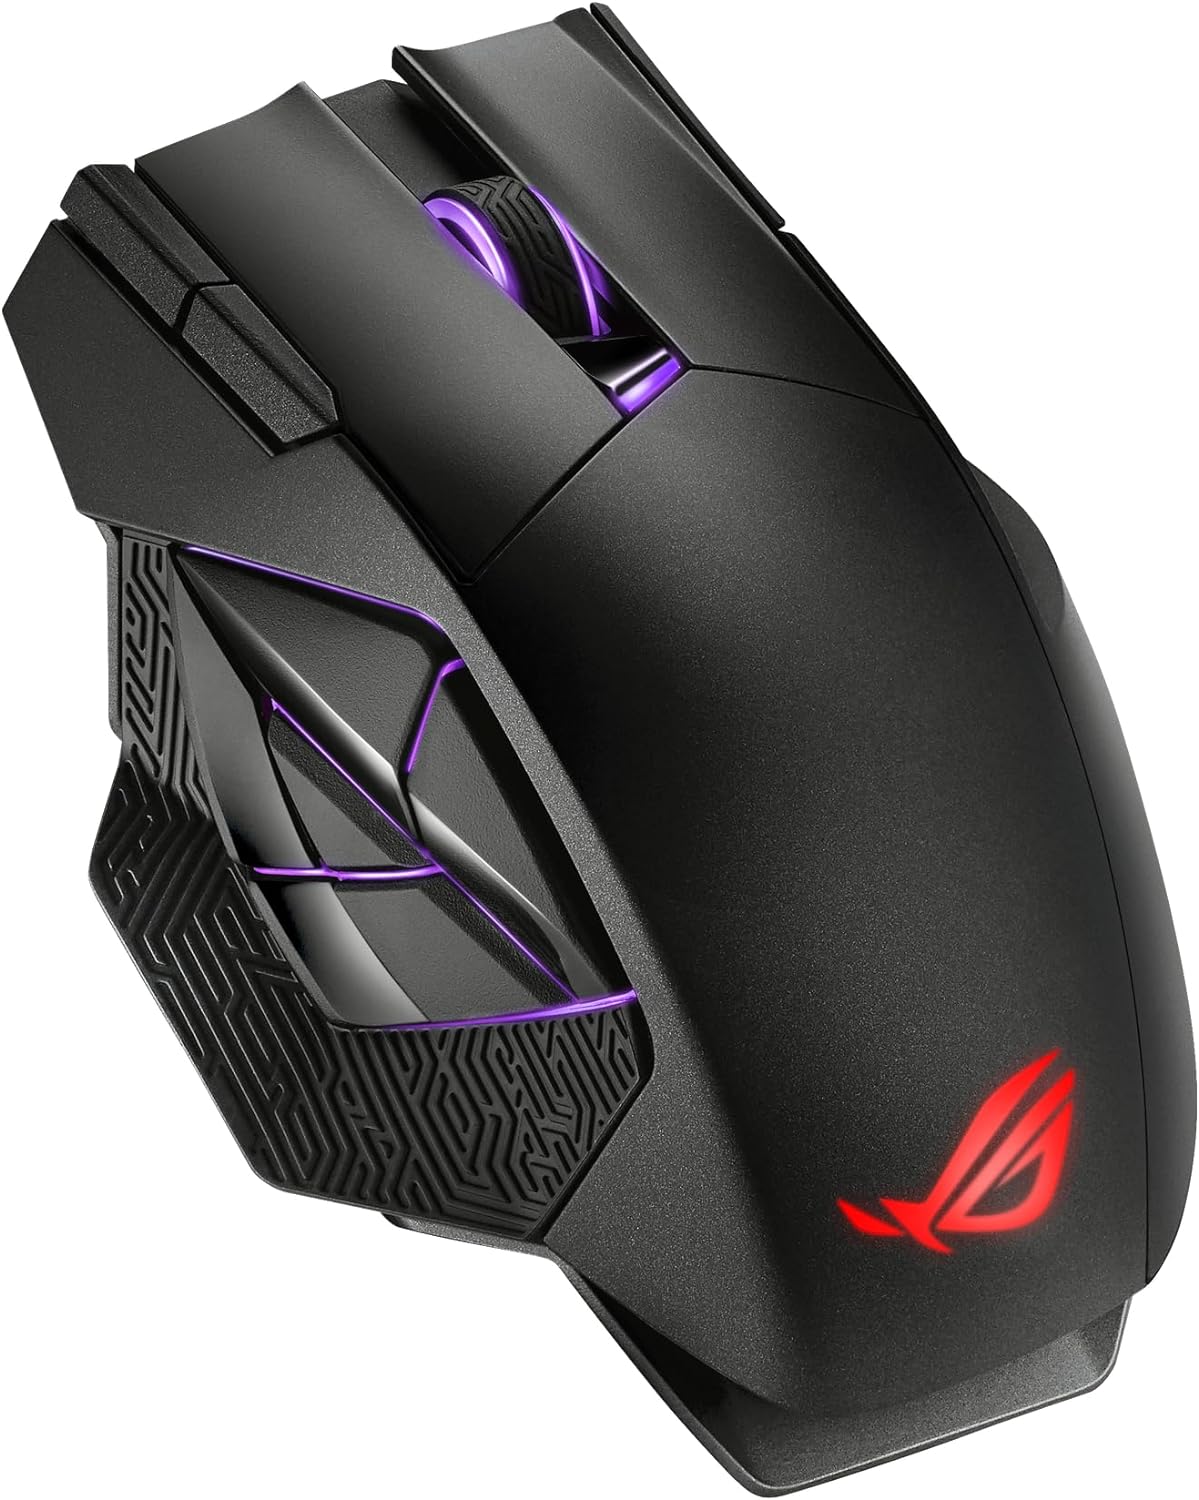 ASUS ROG Spatha X Wireless Gaming Mouse, 2.4 GHz / Wired USB, 19,000 DPI Optical Sensor, 12 Programmable Buttons, RGB, Swappable Switch Design, Micro Switches, Magnetic Charging Stand, Black